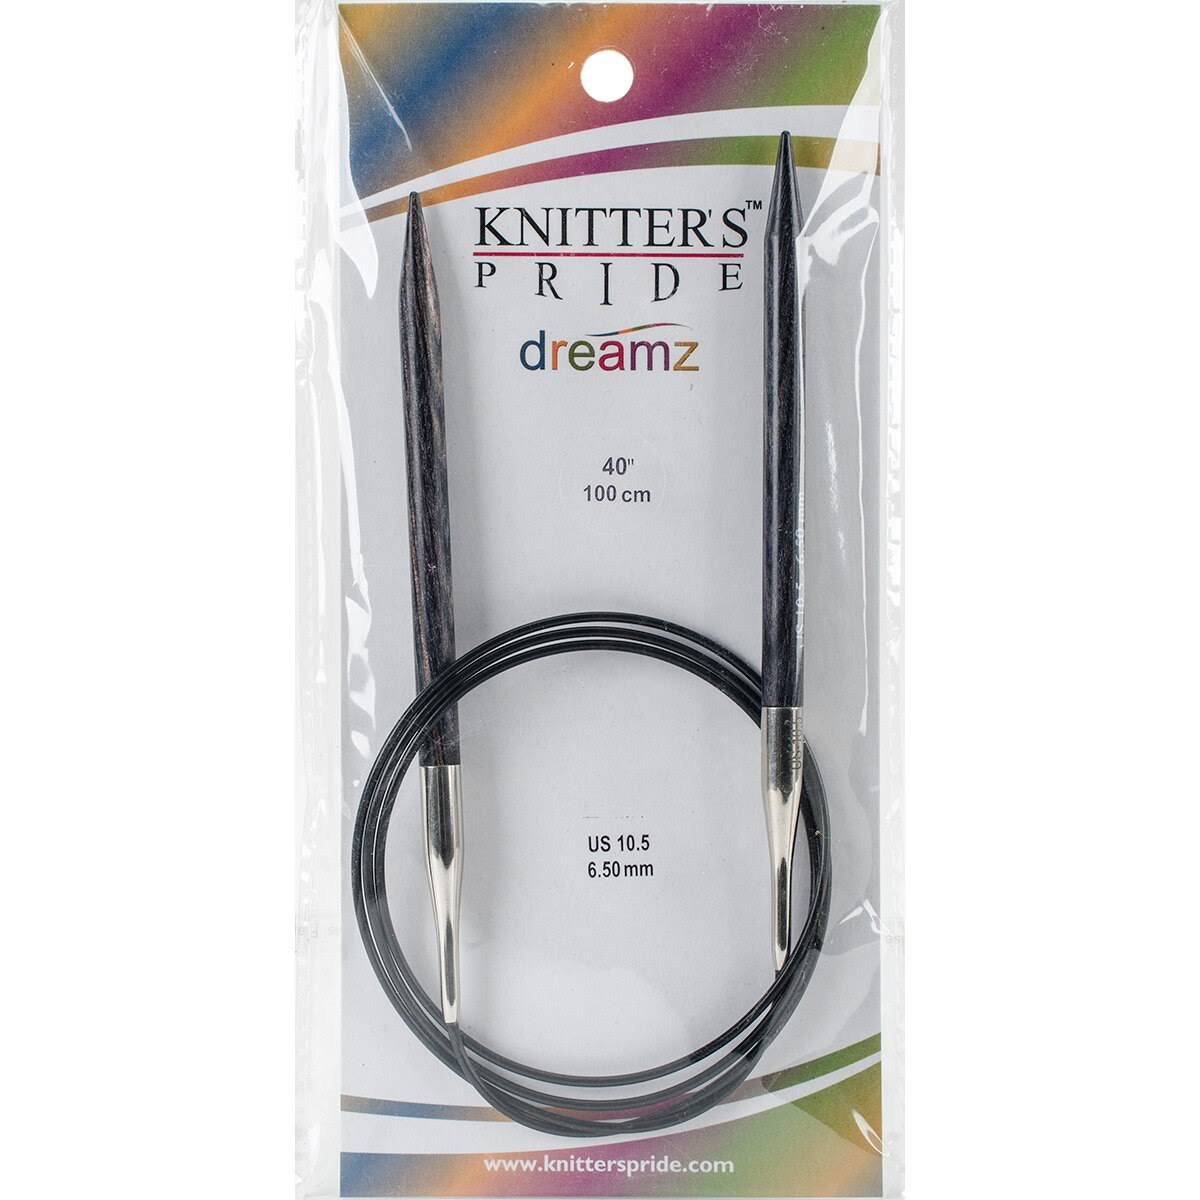 Knitter's Pride Dreamz Fixed Circular Needles - 40in, 10.5/6.5 mm